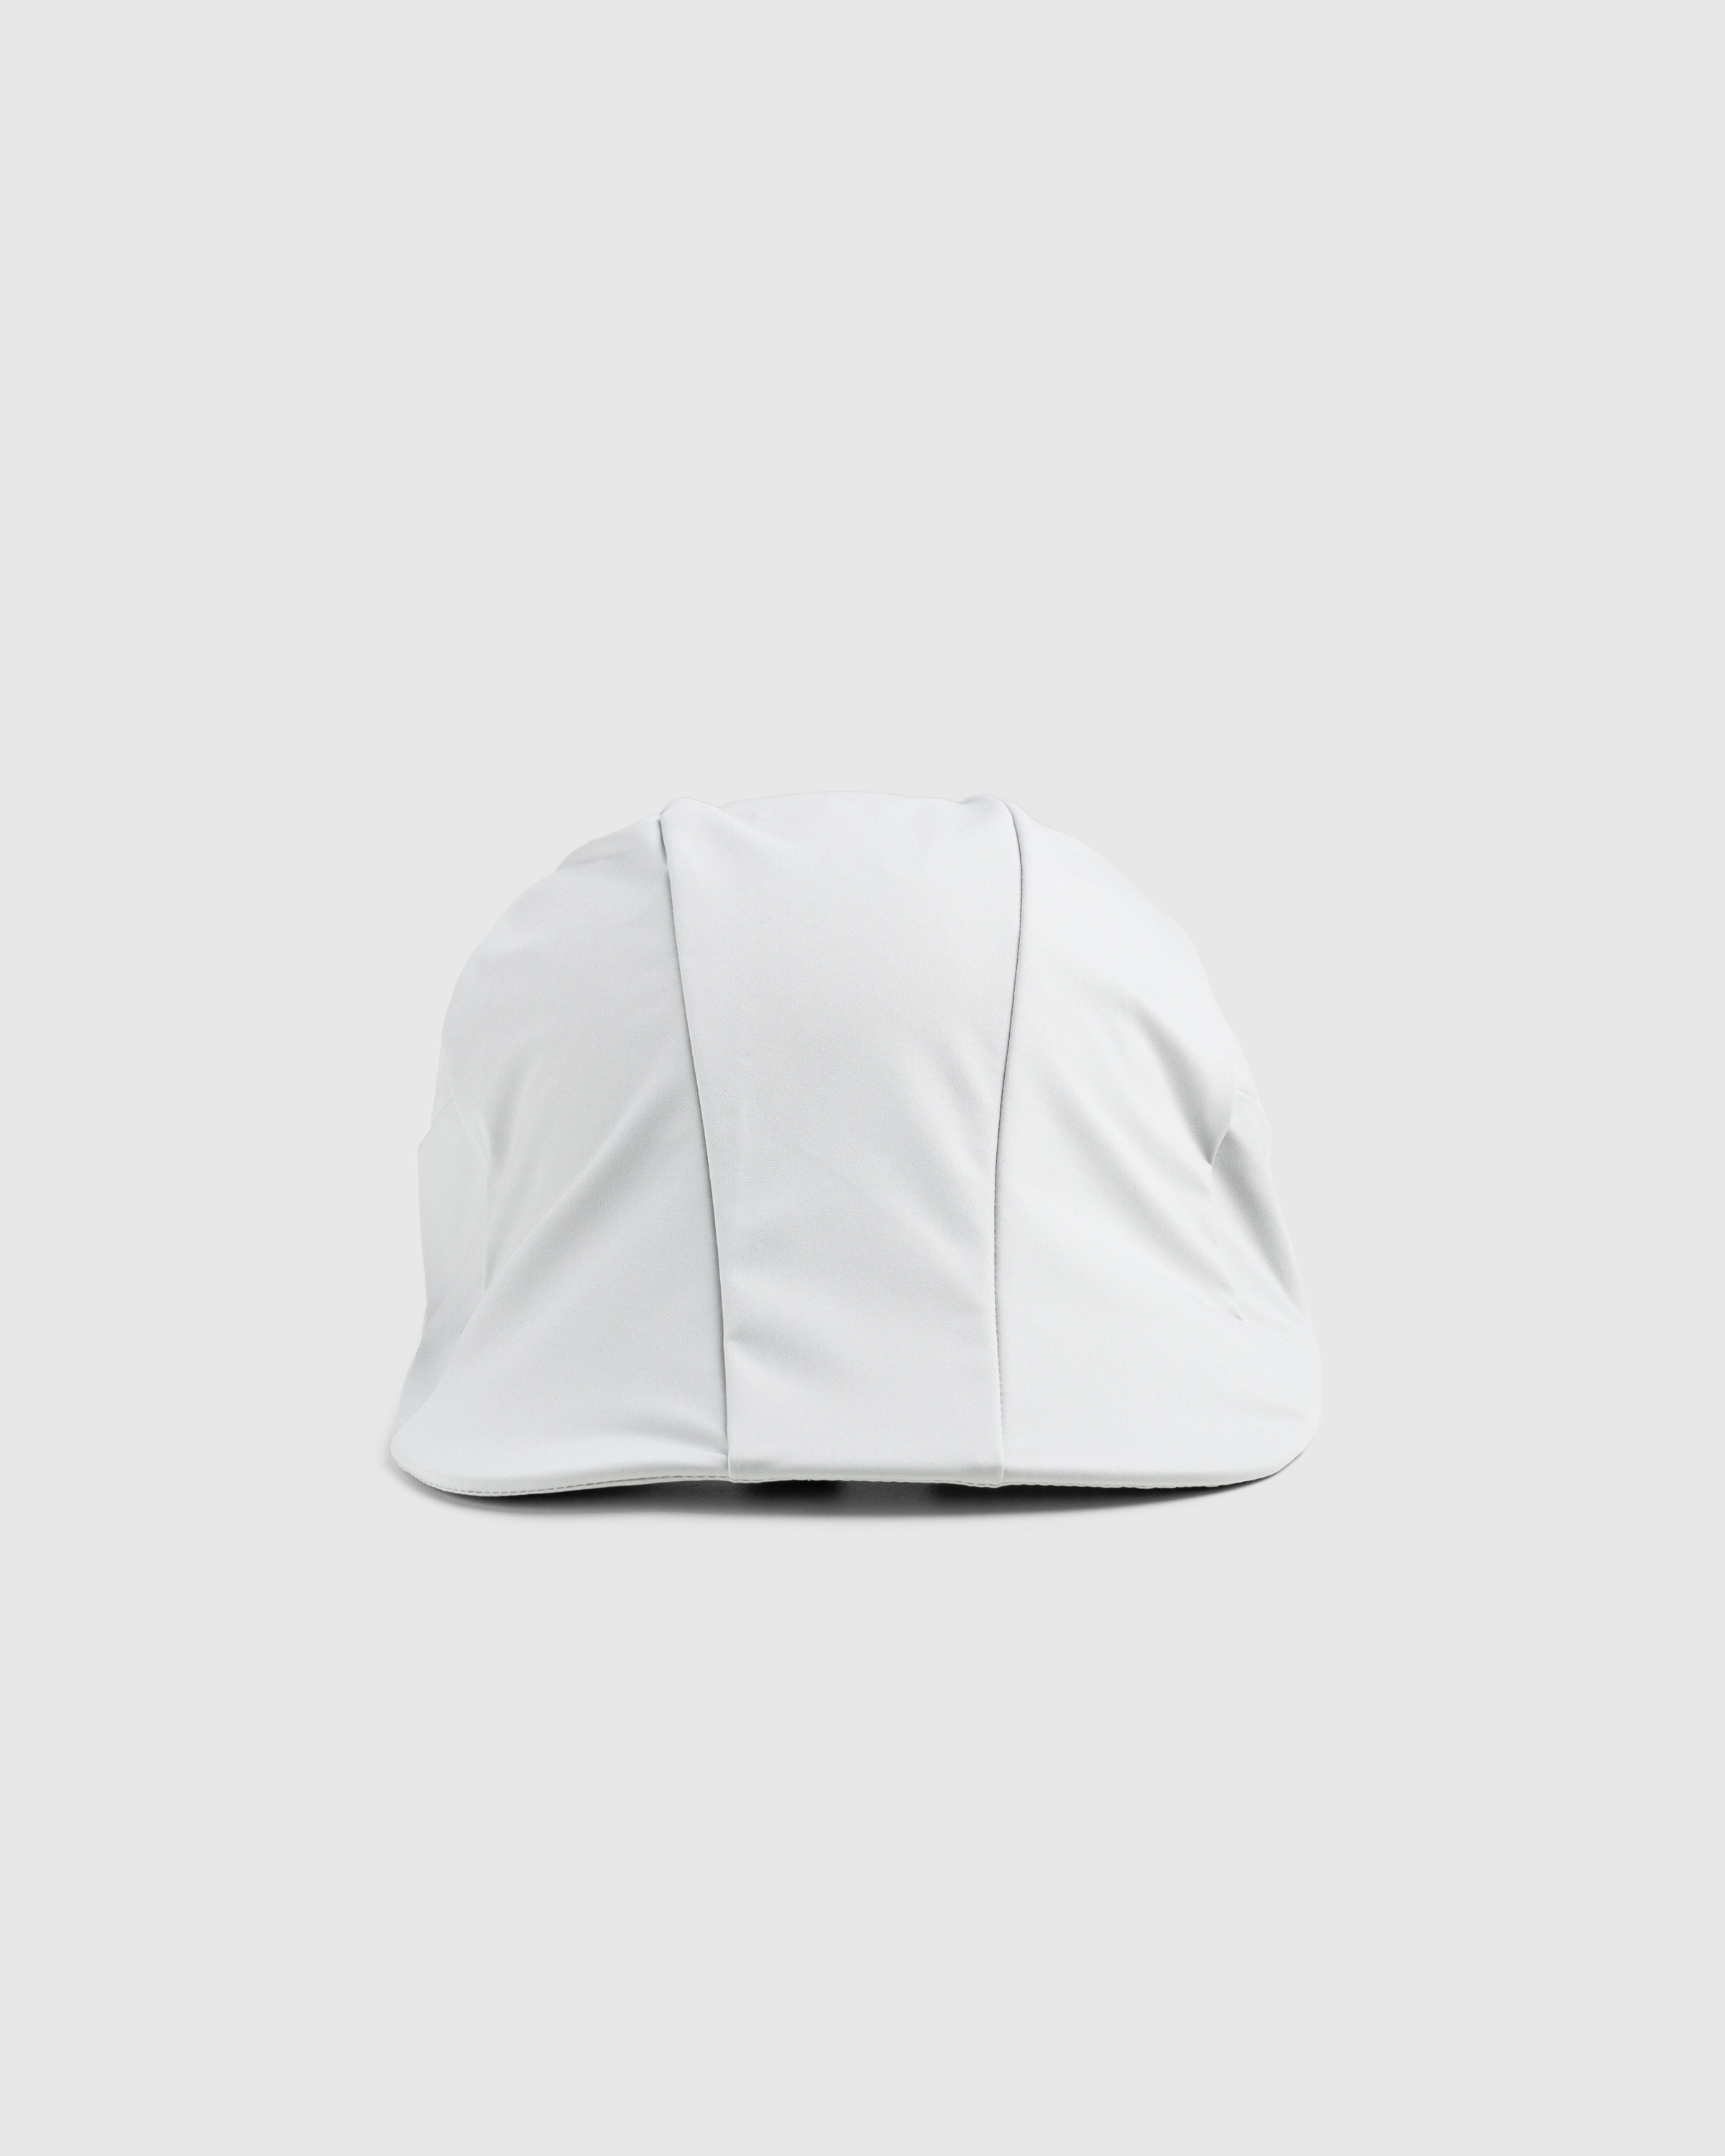 Post Archive Faction (PAF) – 6.0 Cap Right Light Grey - Caps - Grey - Image 2